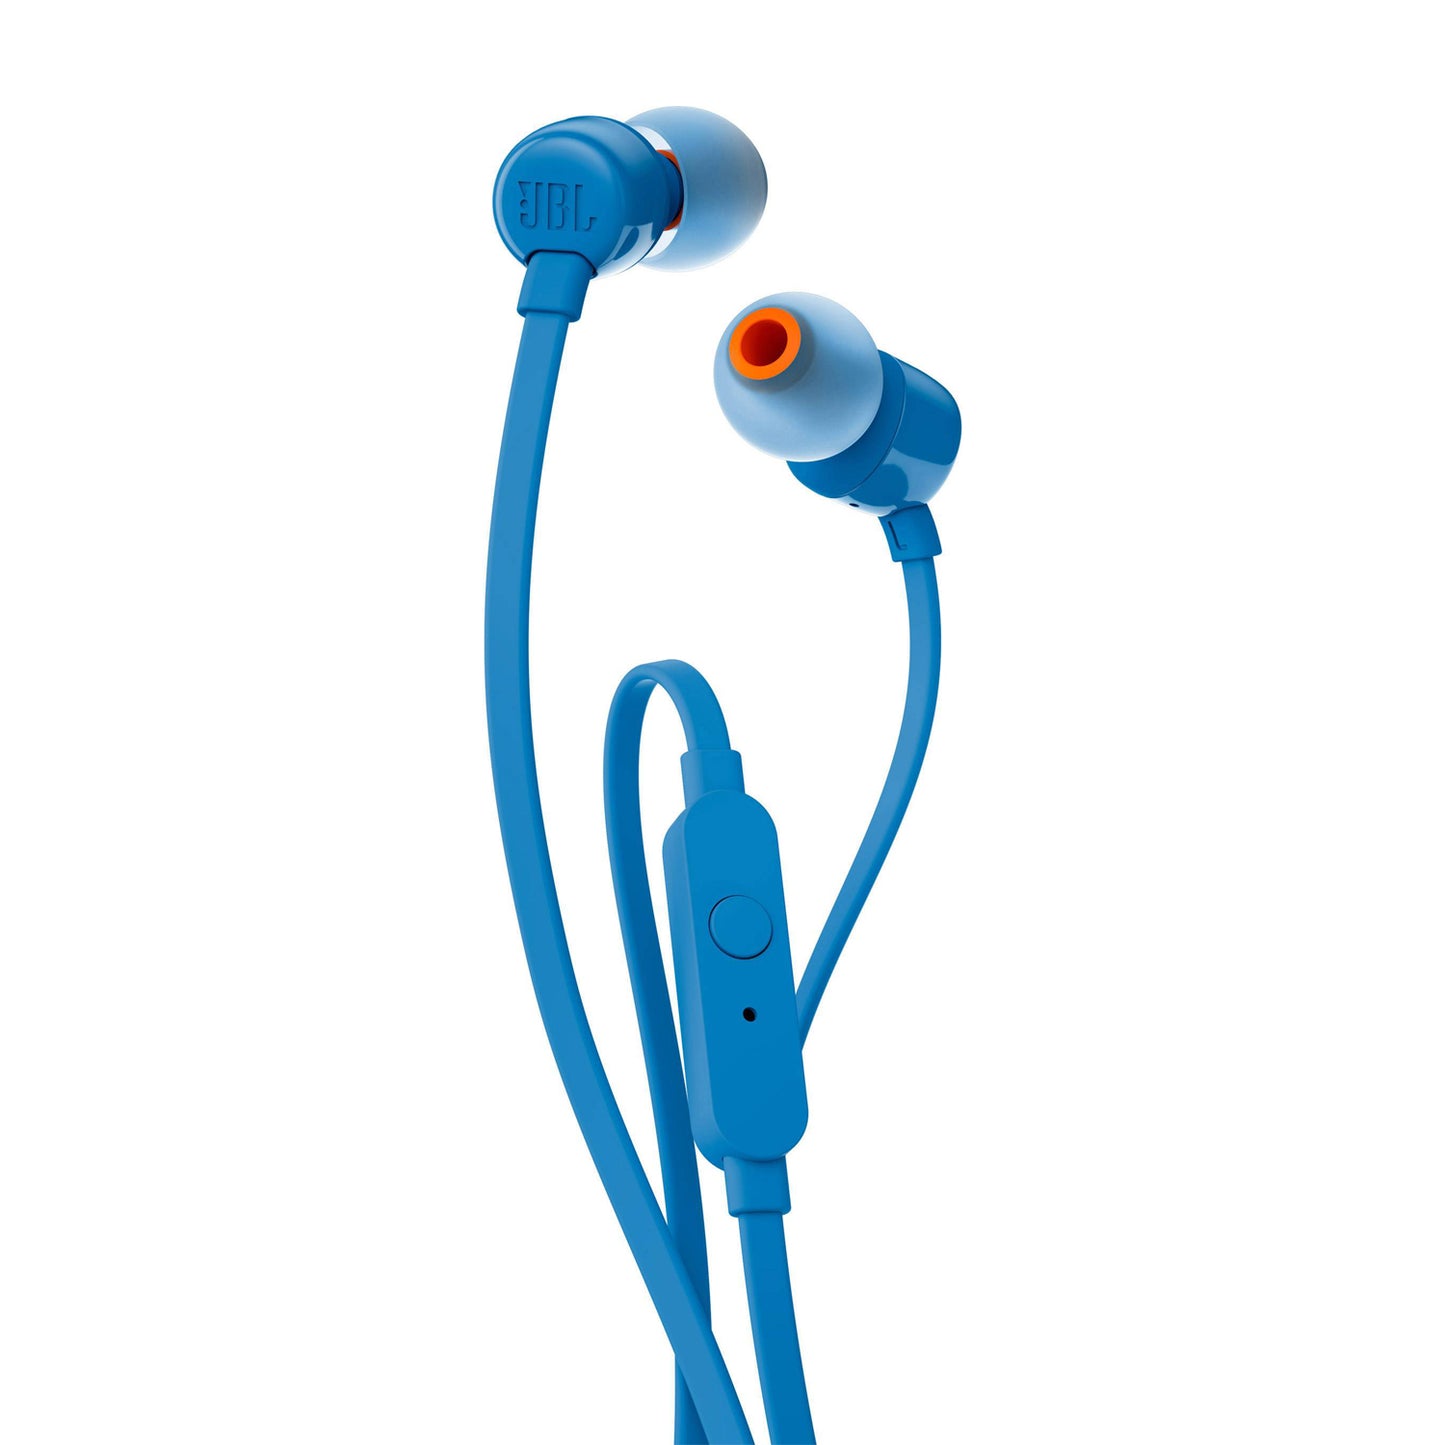 JBL T110 In Ear Headphones with Microphone, Tangle-Free Flat Cable, One-Button Control, JBL Pure Bass Sound, Blue